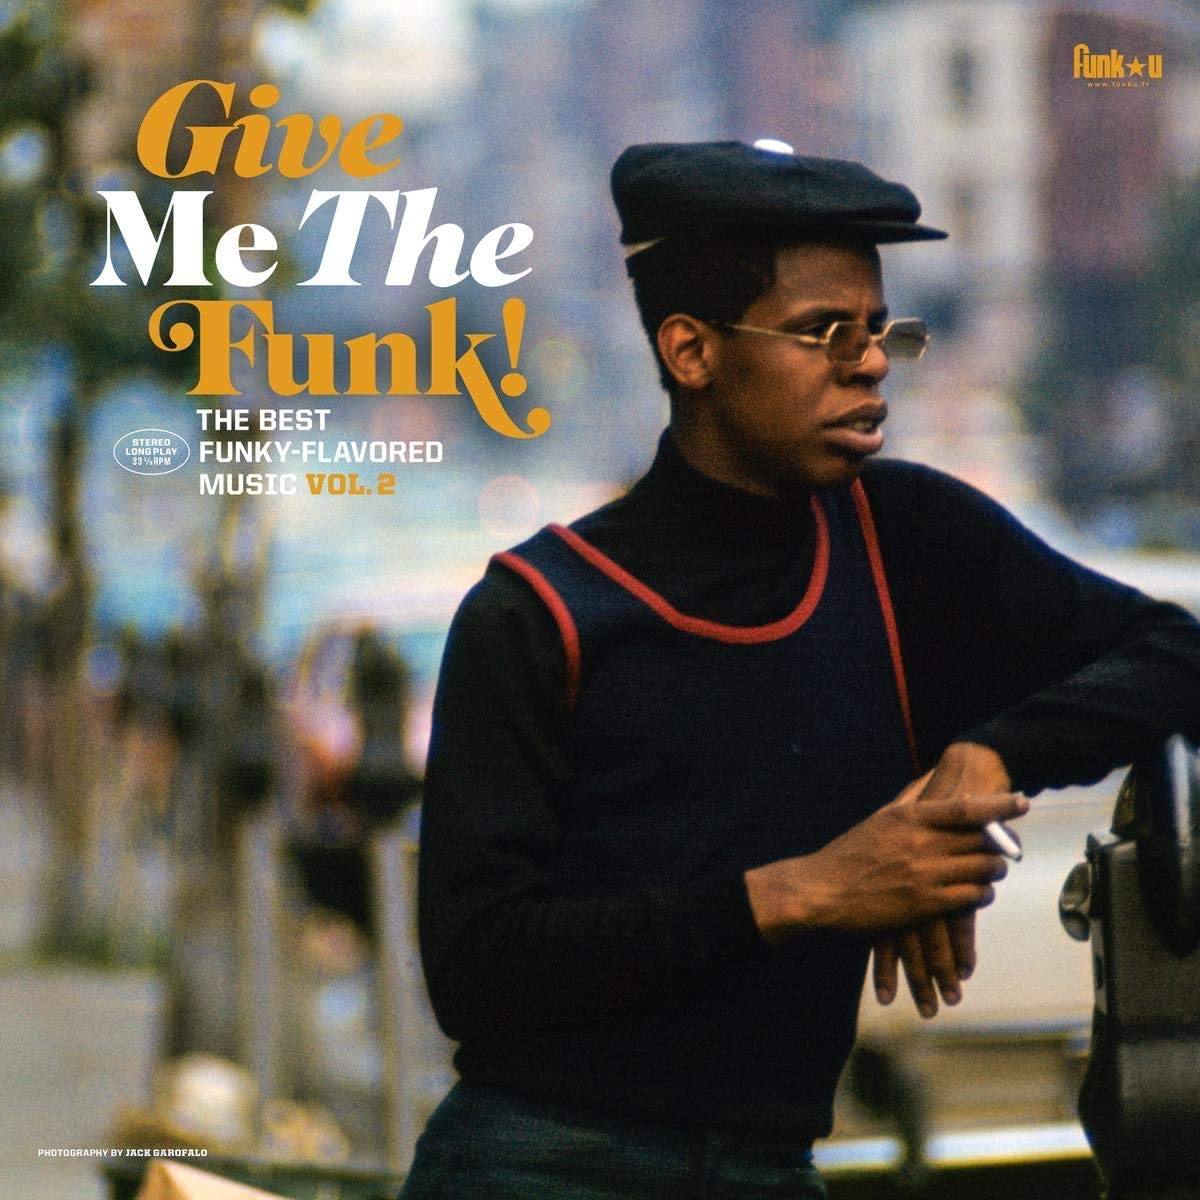 GIVE ME THE FUNK! 2